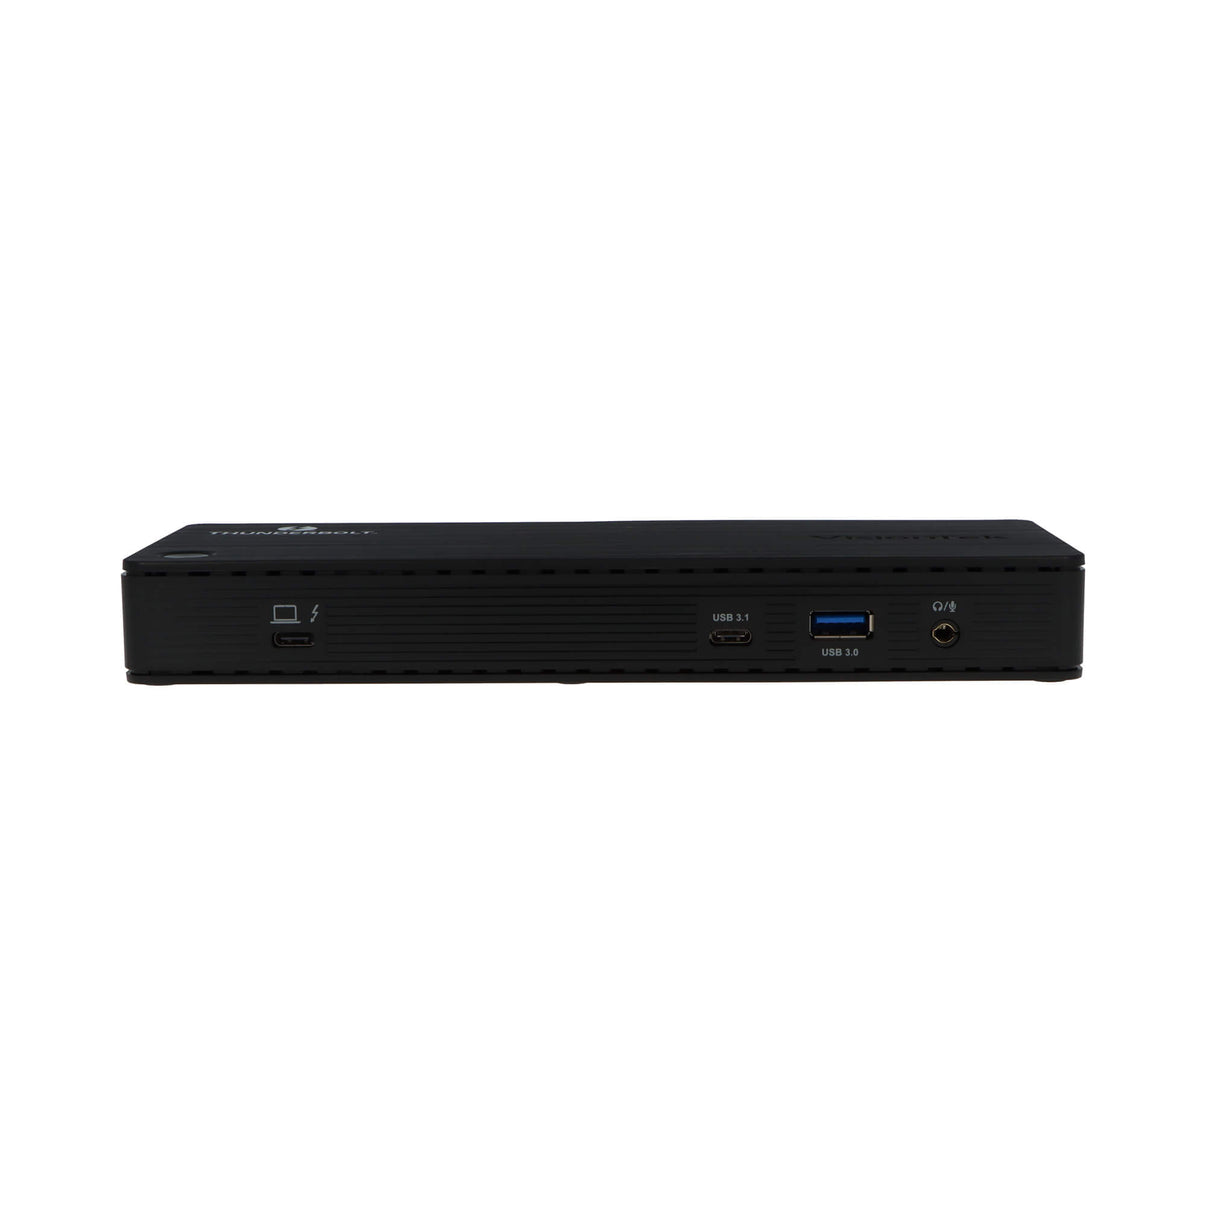 VT4800 Thunderbolt 3 Dock - Dual Display 8K Support & Power Delivery ...